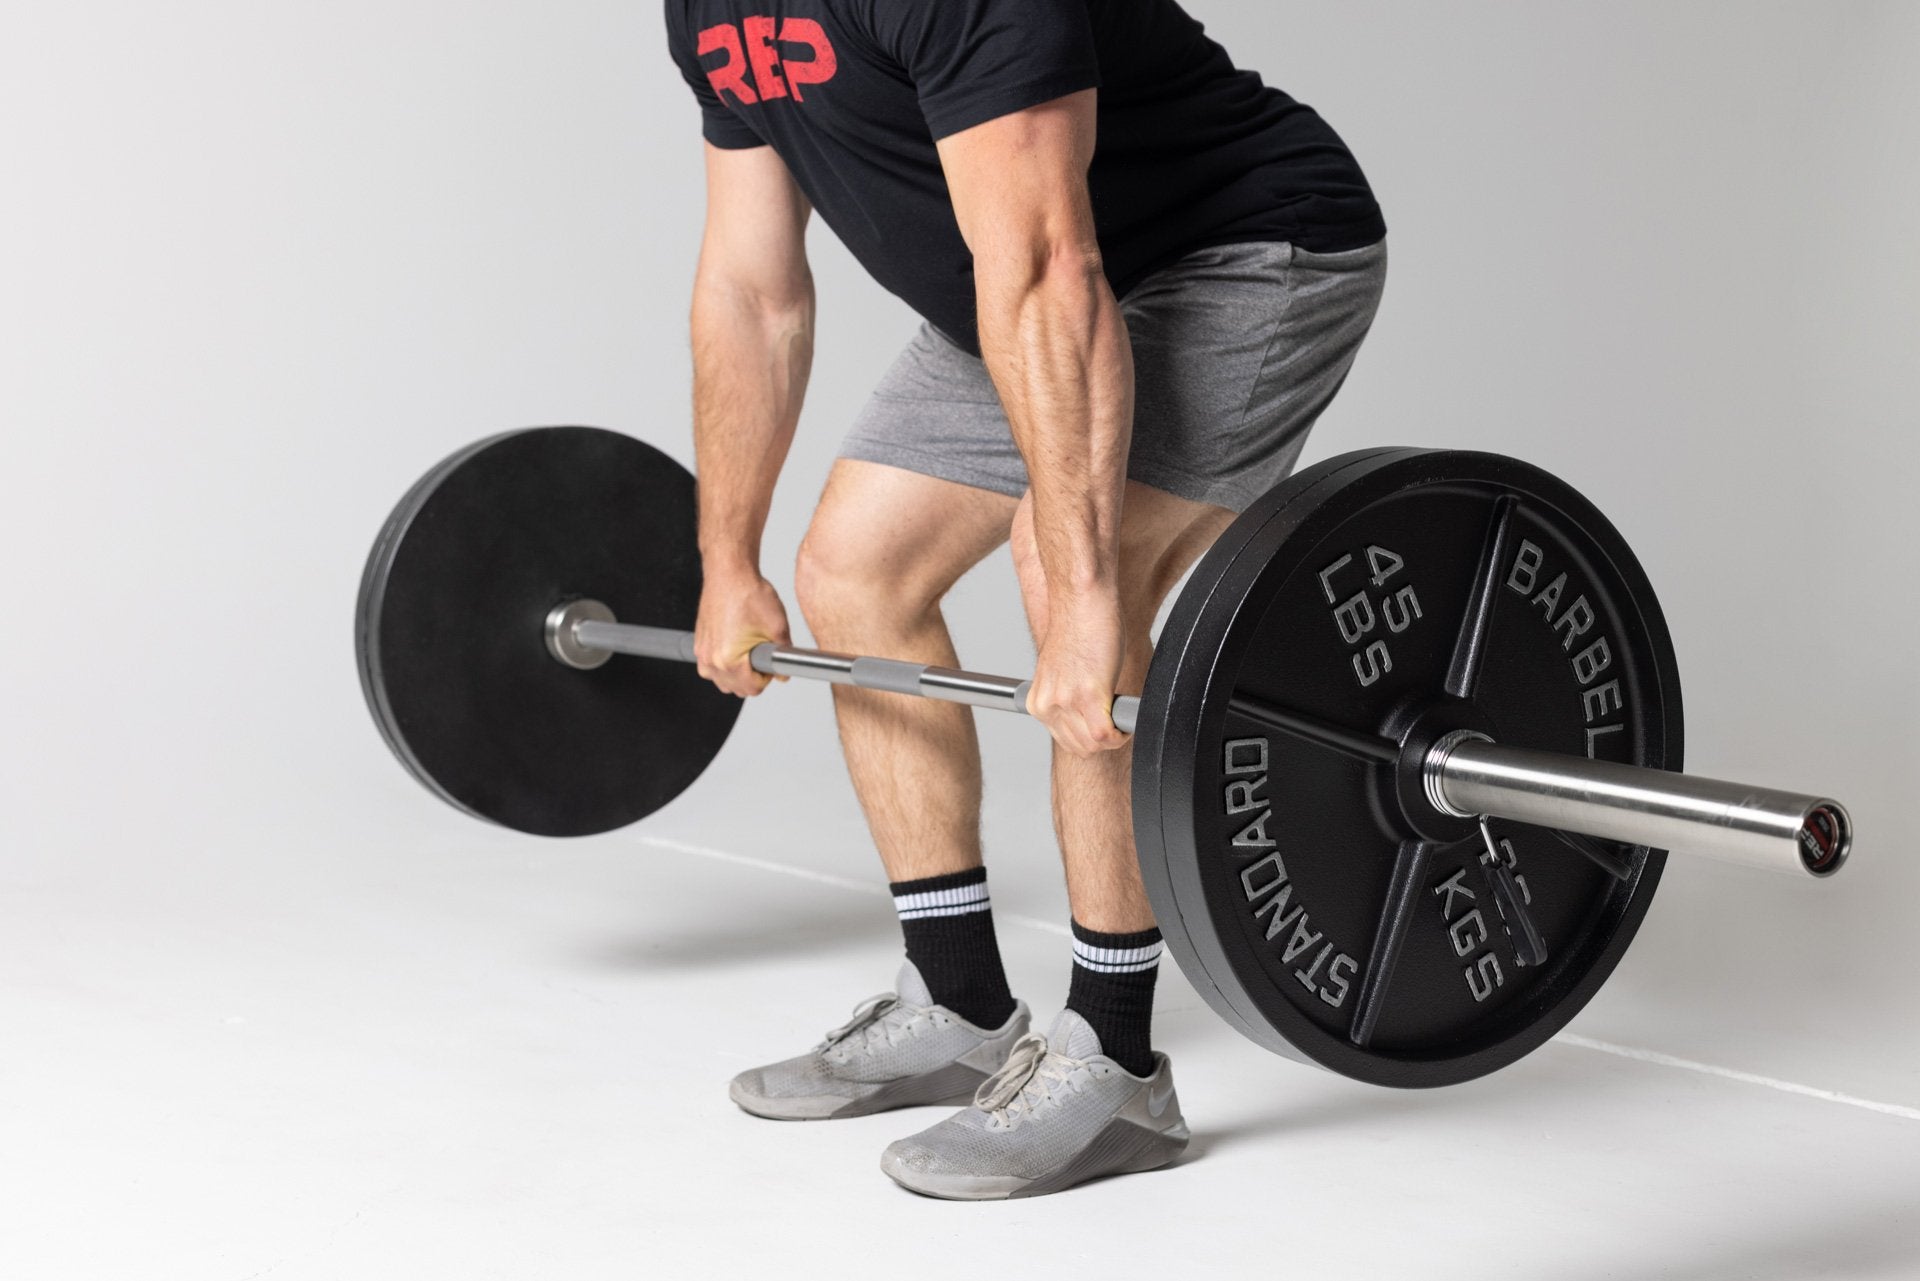 Lifter performing a deadlift at just below knee level position using a barbell loaded with two pairs of 45lb Old School Iron Plates and spring clips.